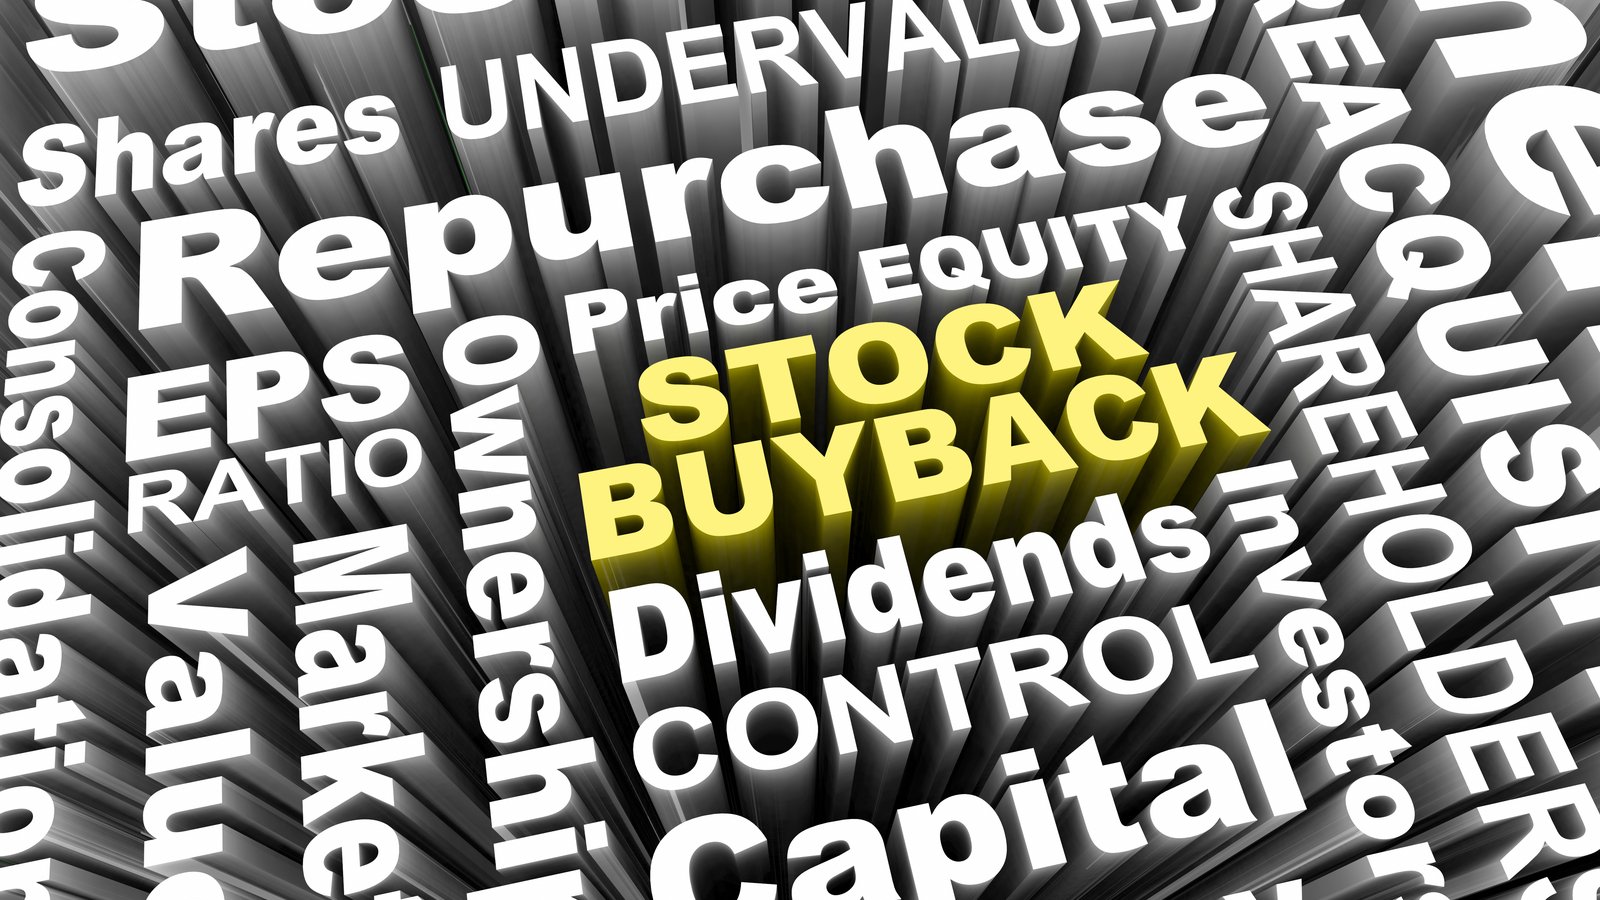 These 7 Buyback Stocks Have Good Dividend & Total Yields for Investors | InvestorPlace